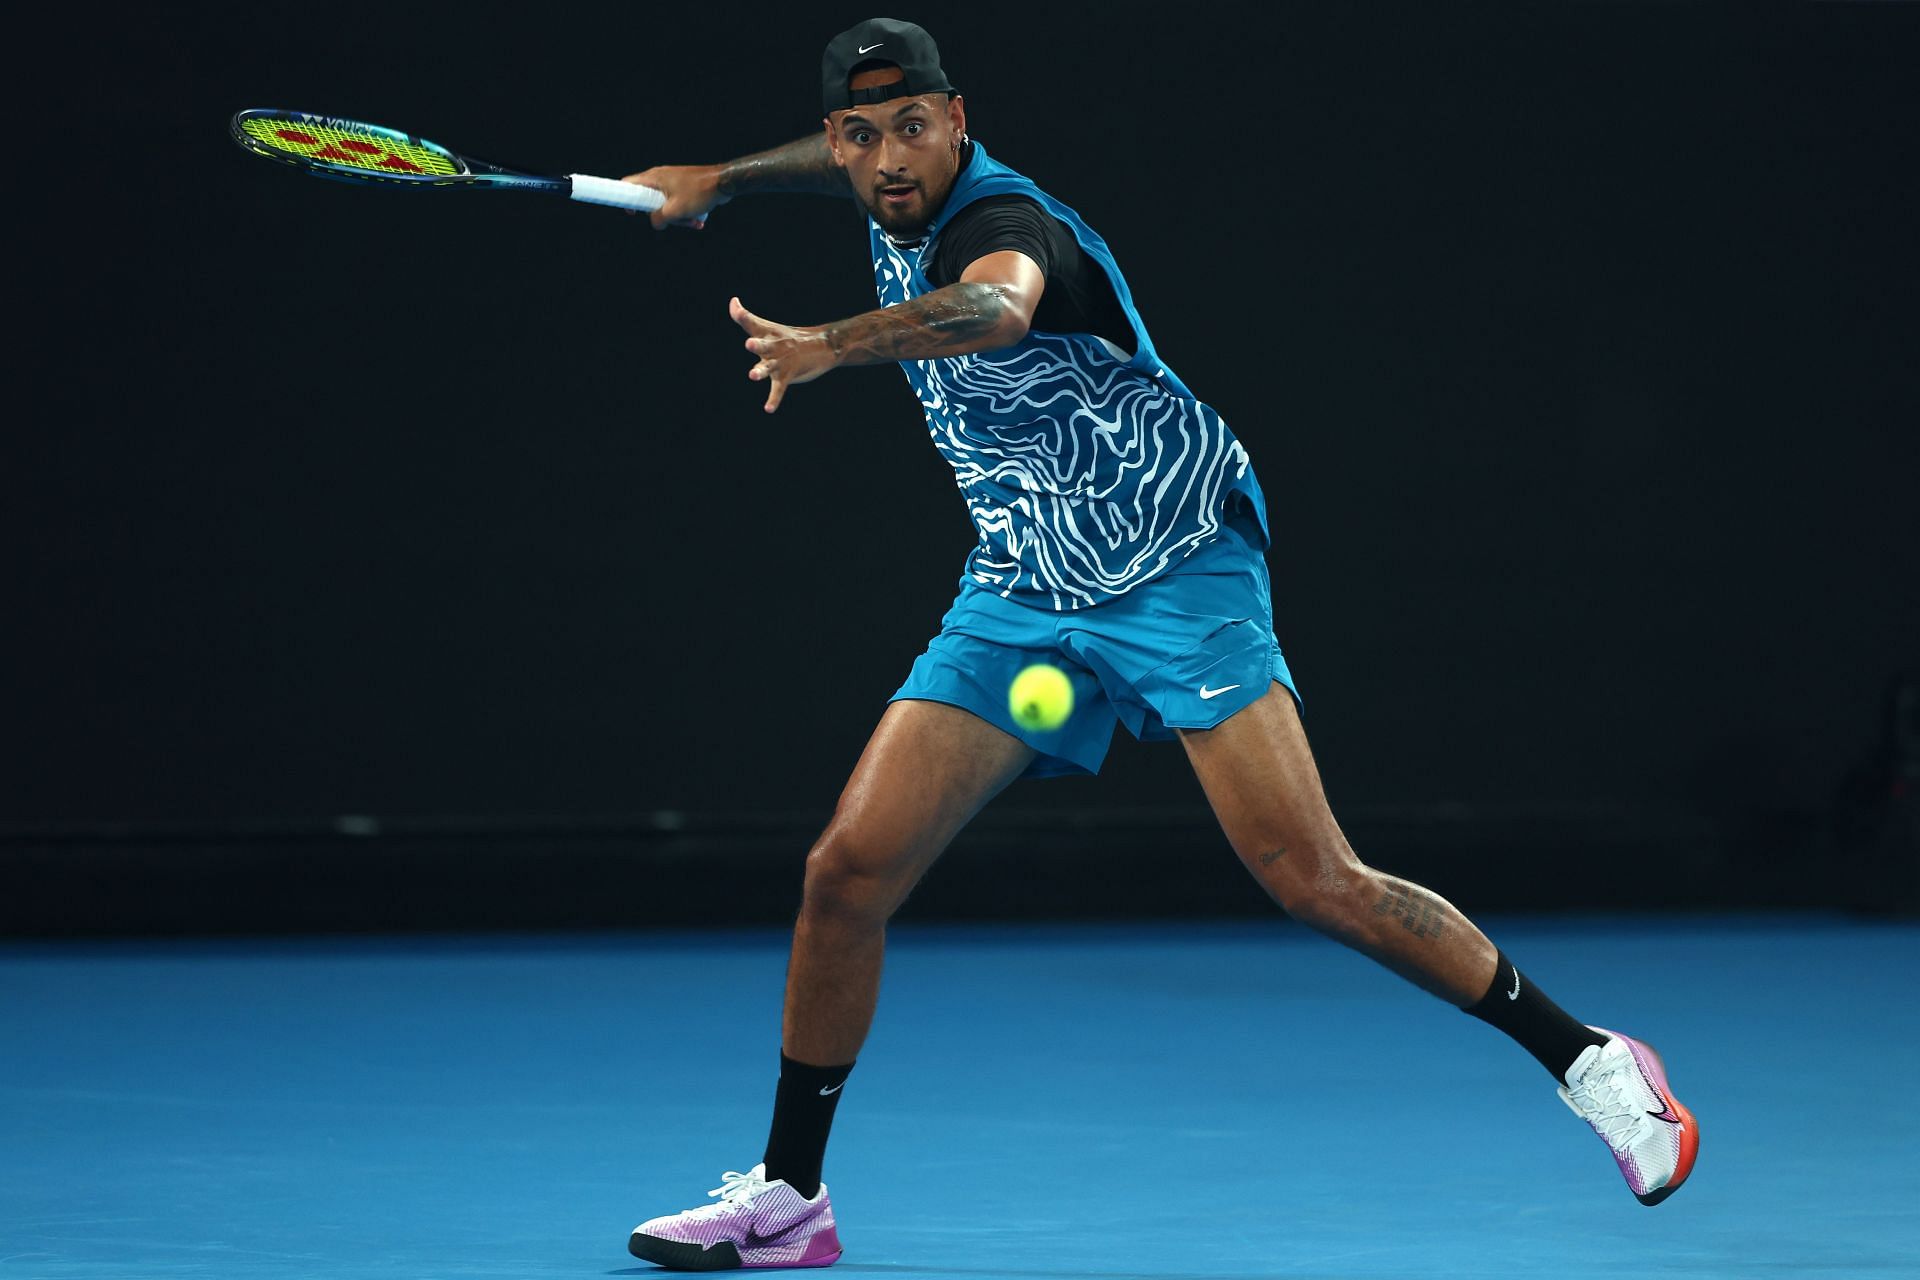 Nick Kyrgios playing in a charity match ahead of the 2023 Australian Open